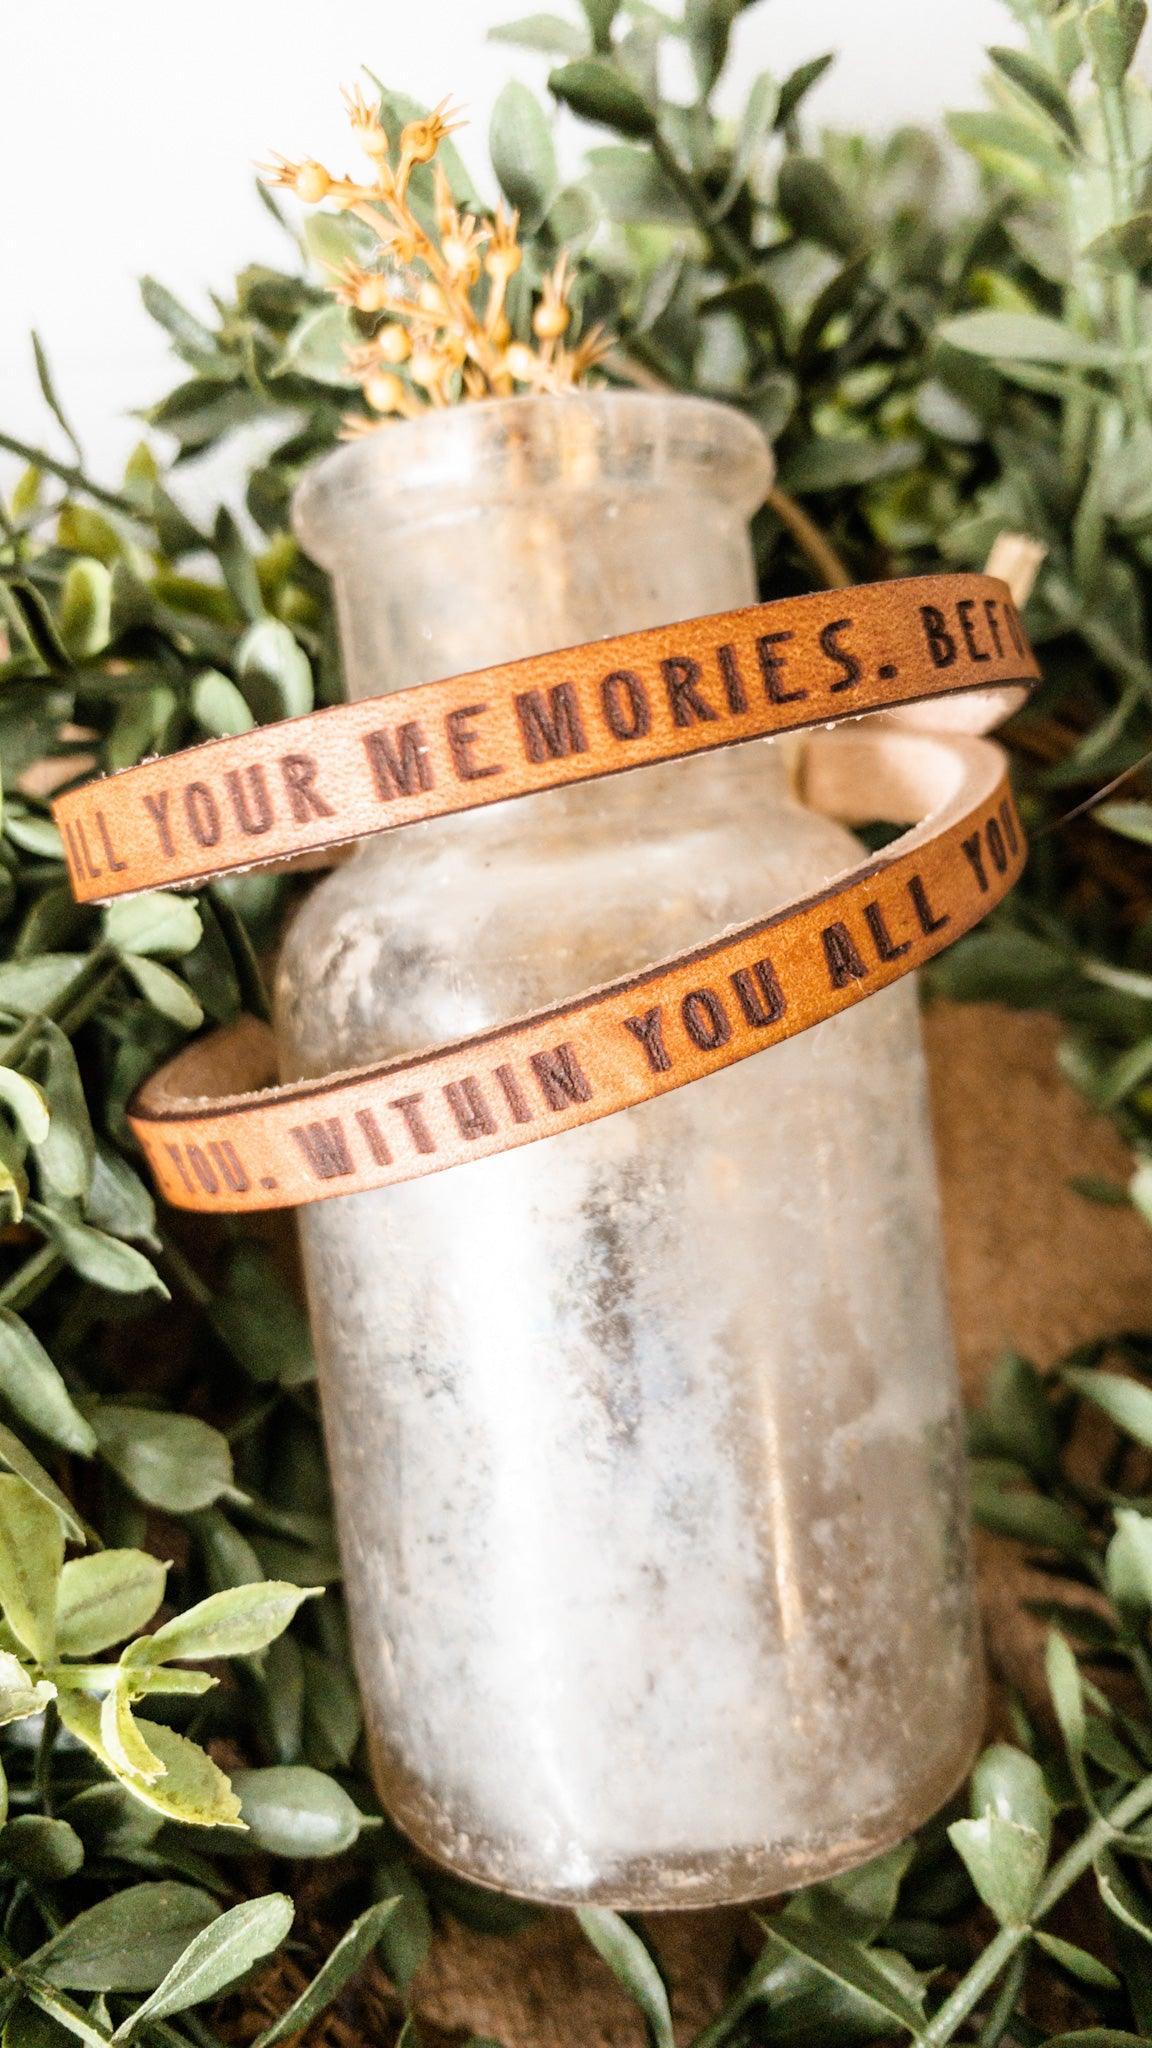 Behind You Are All Your Memories Leather Bracelet - Vintage Soul